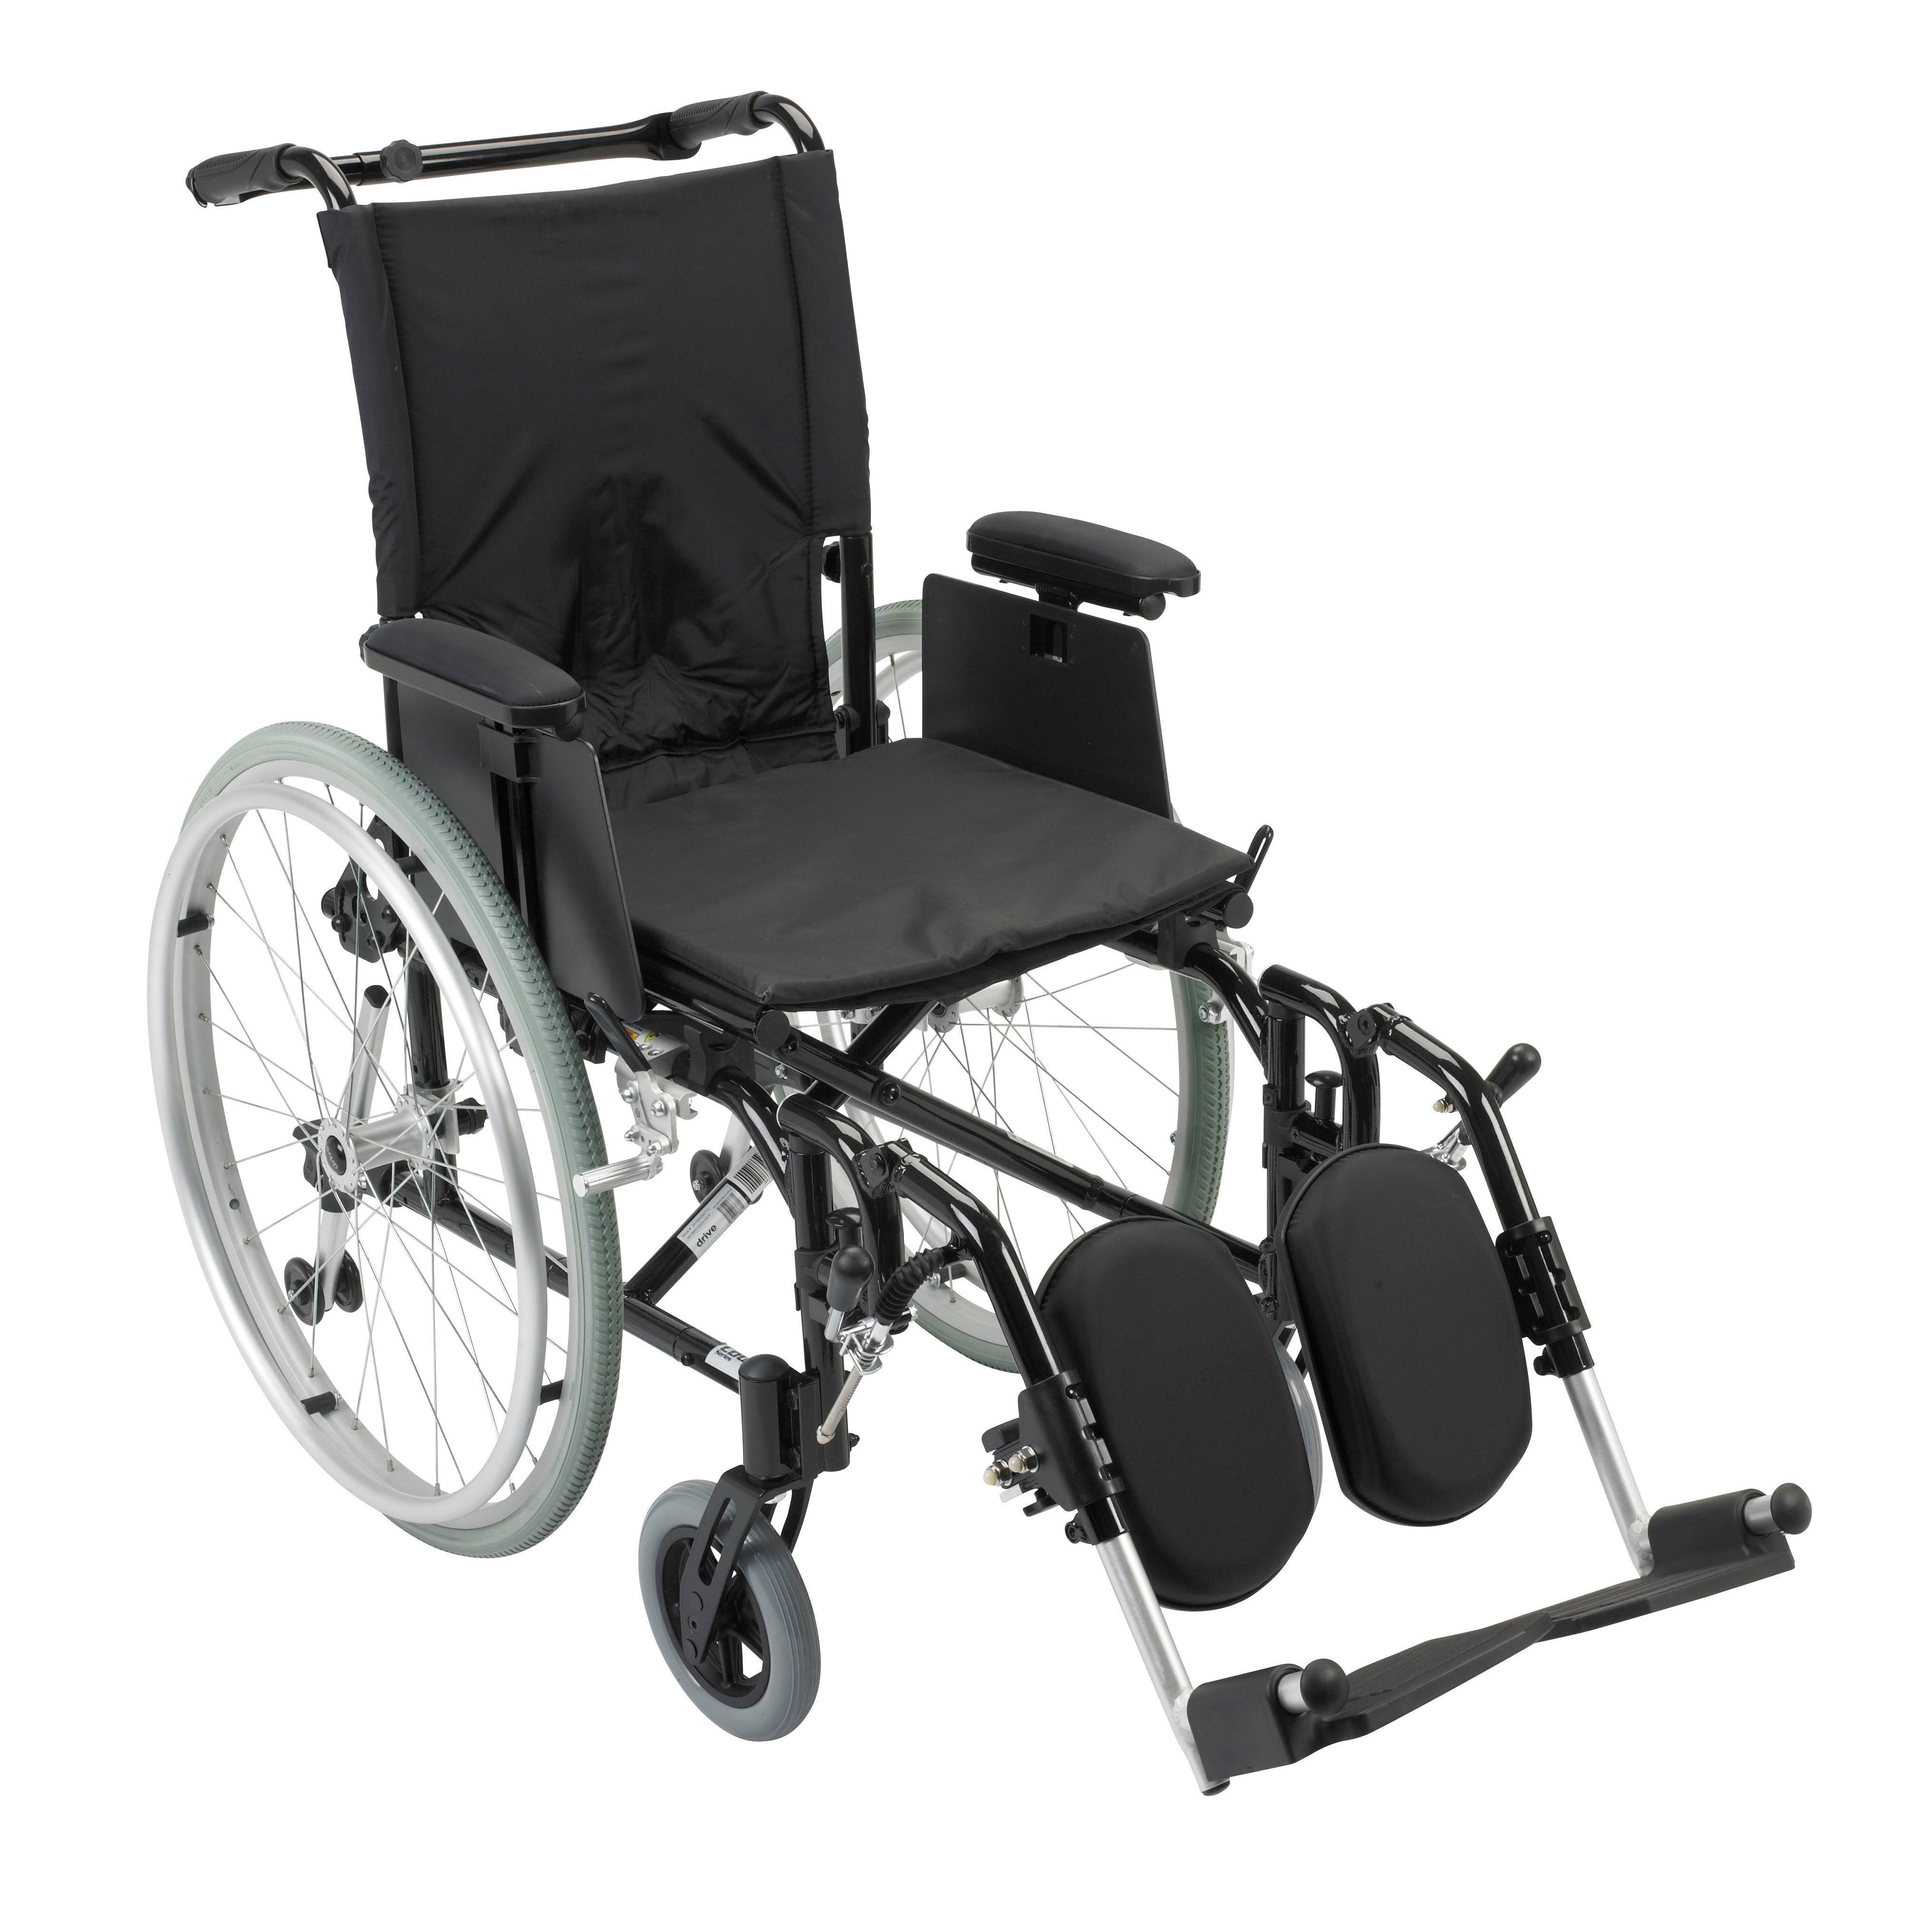 Drive Cougar Ultralight Wheelchair Options - Size: 16